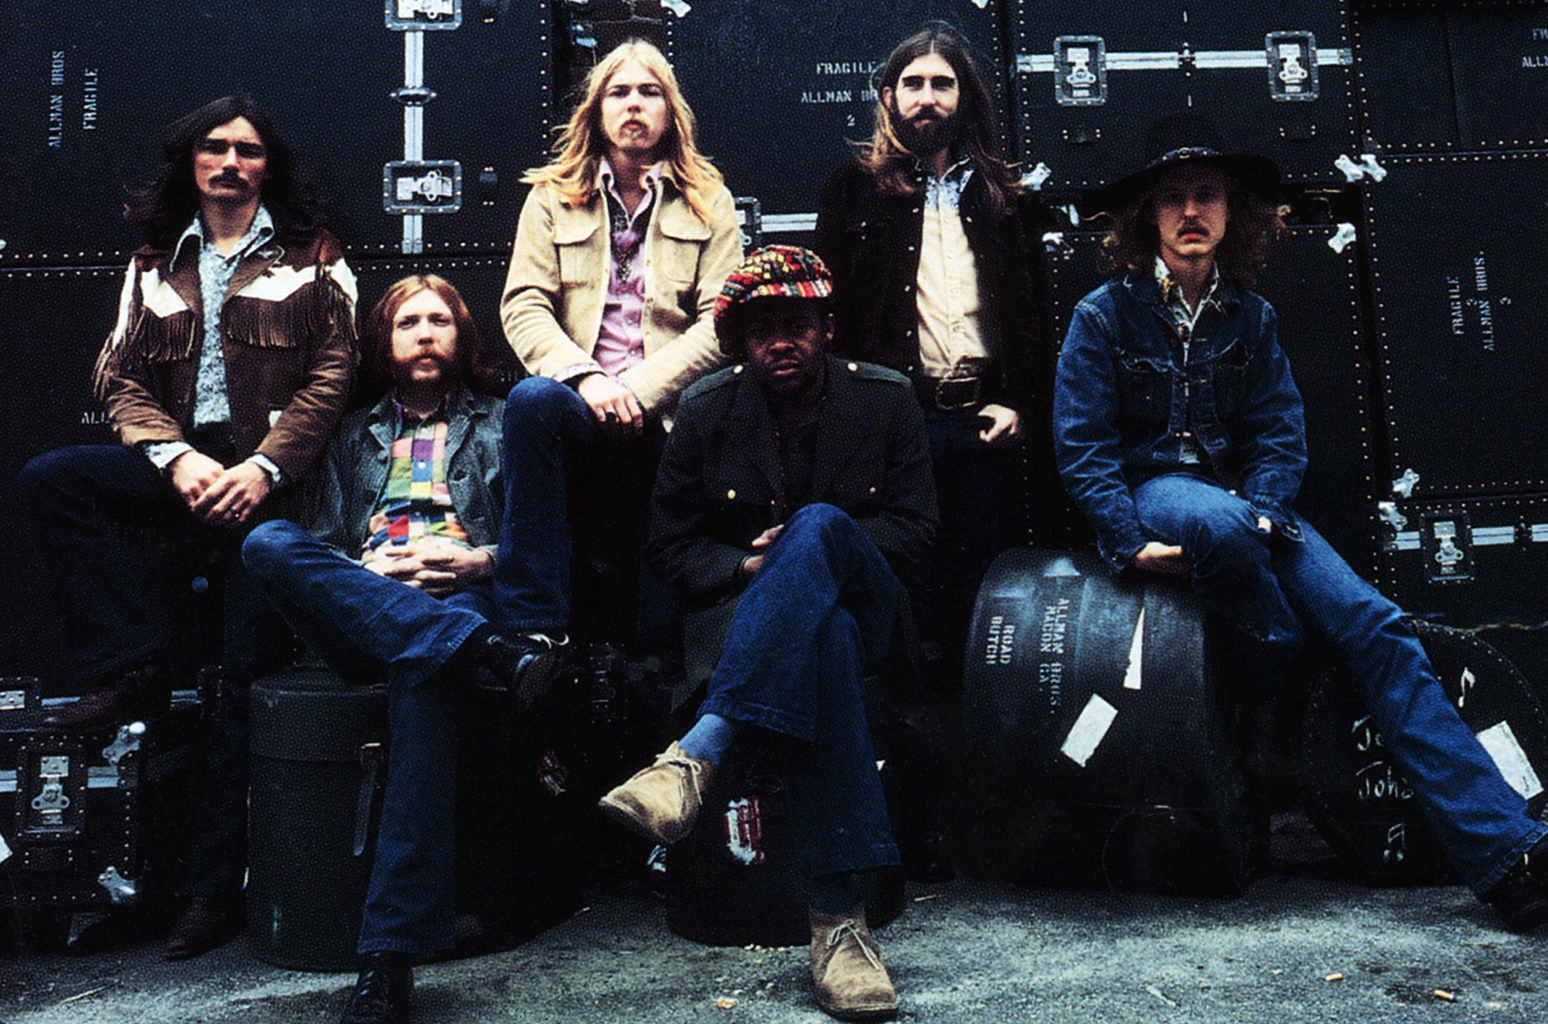 Allman Brothers Band to Celebrate 50th Anniversary With NYC Tribute Show - www.billboard.com - county Garden - county York - city New York, county Garden